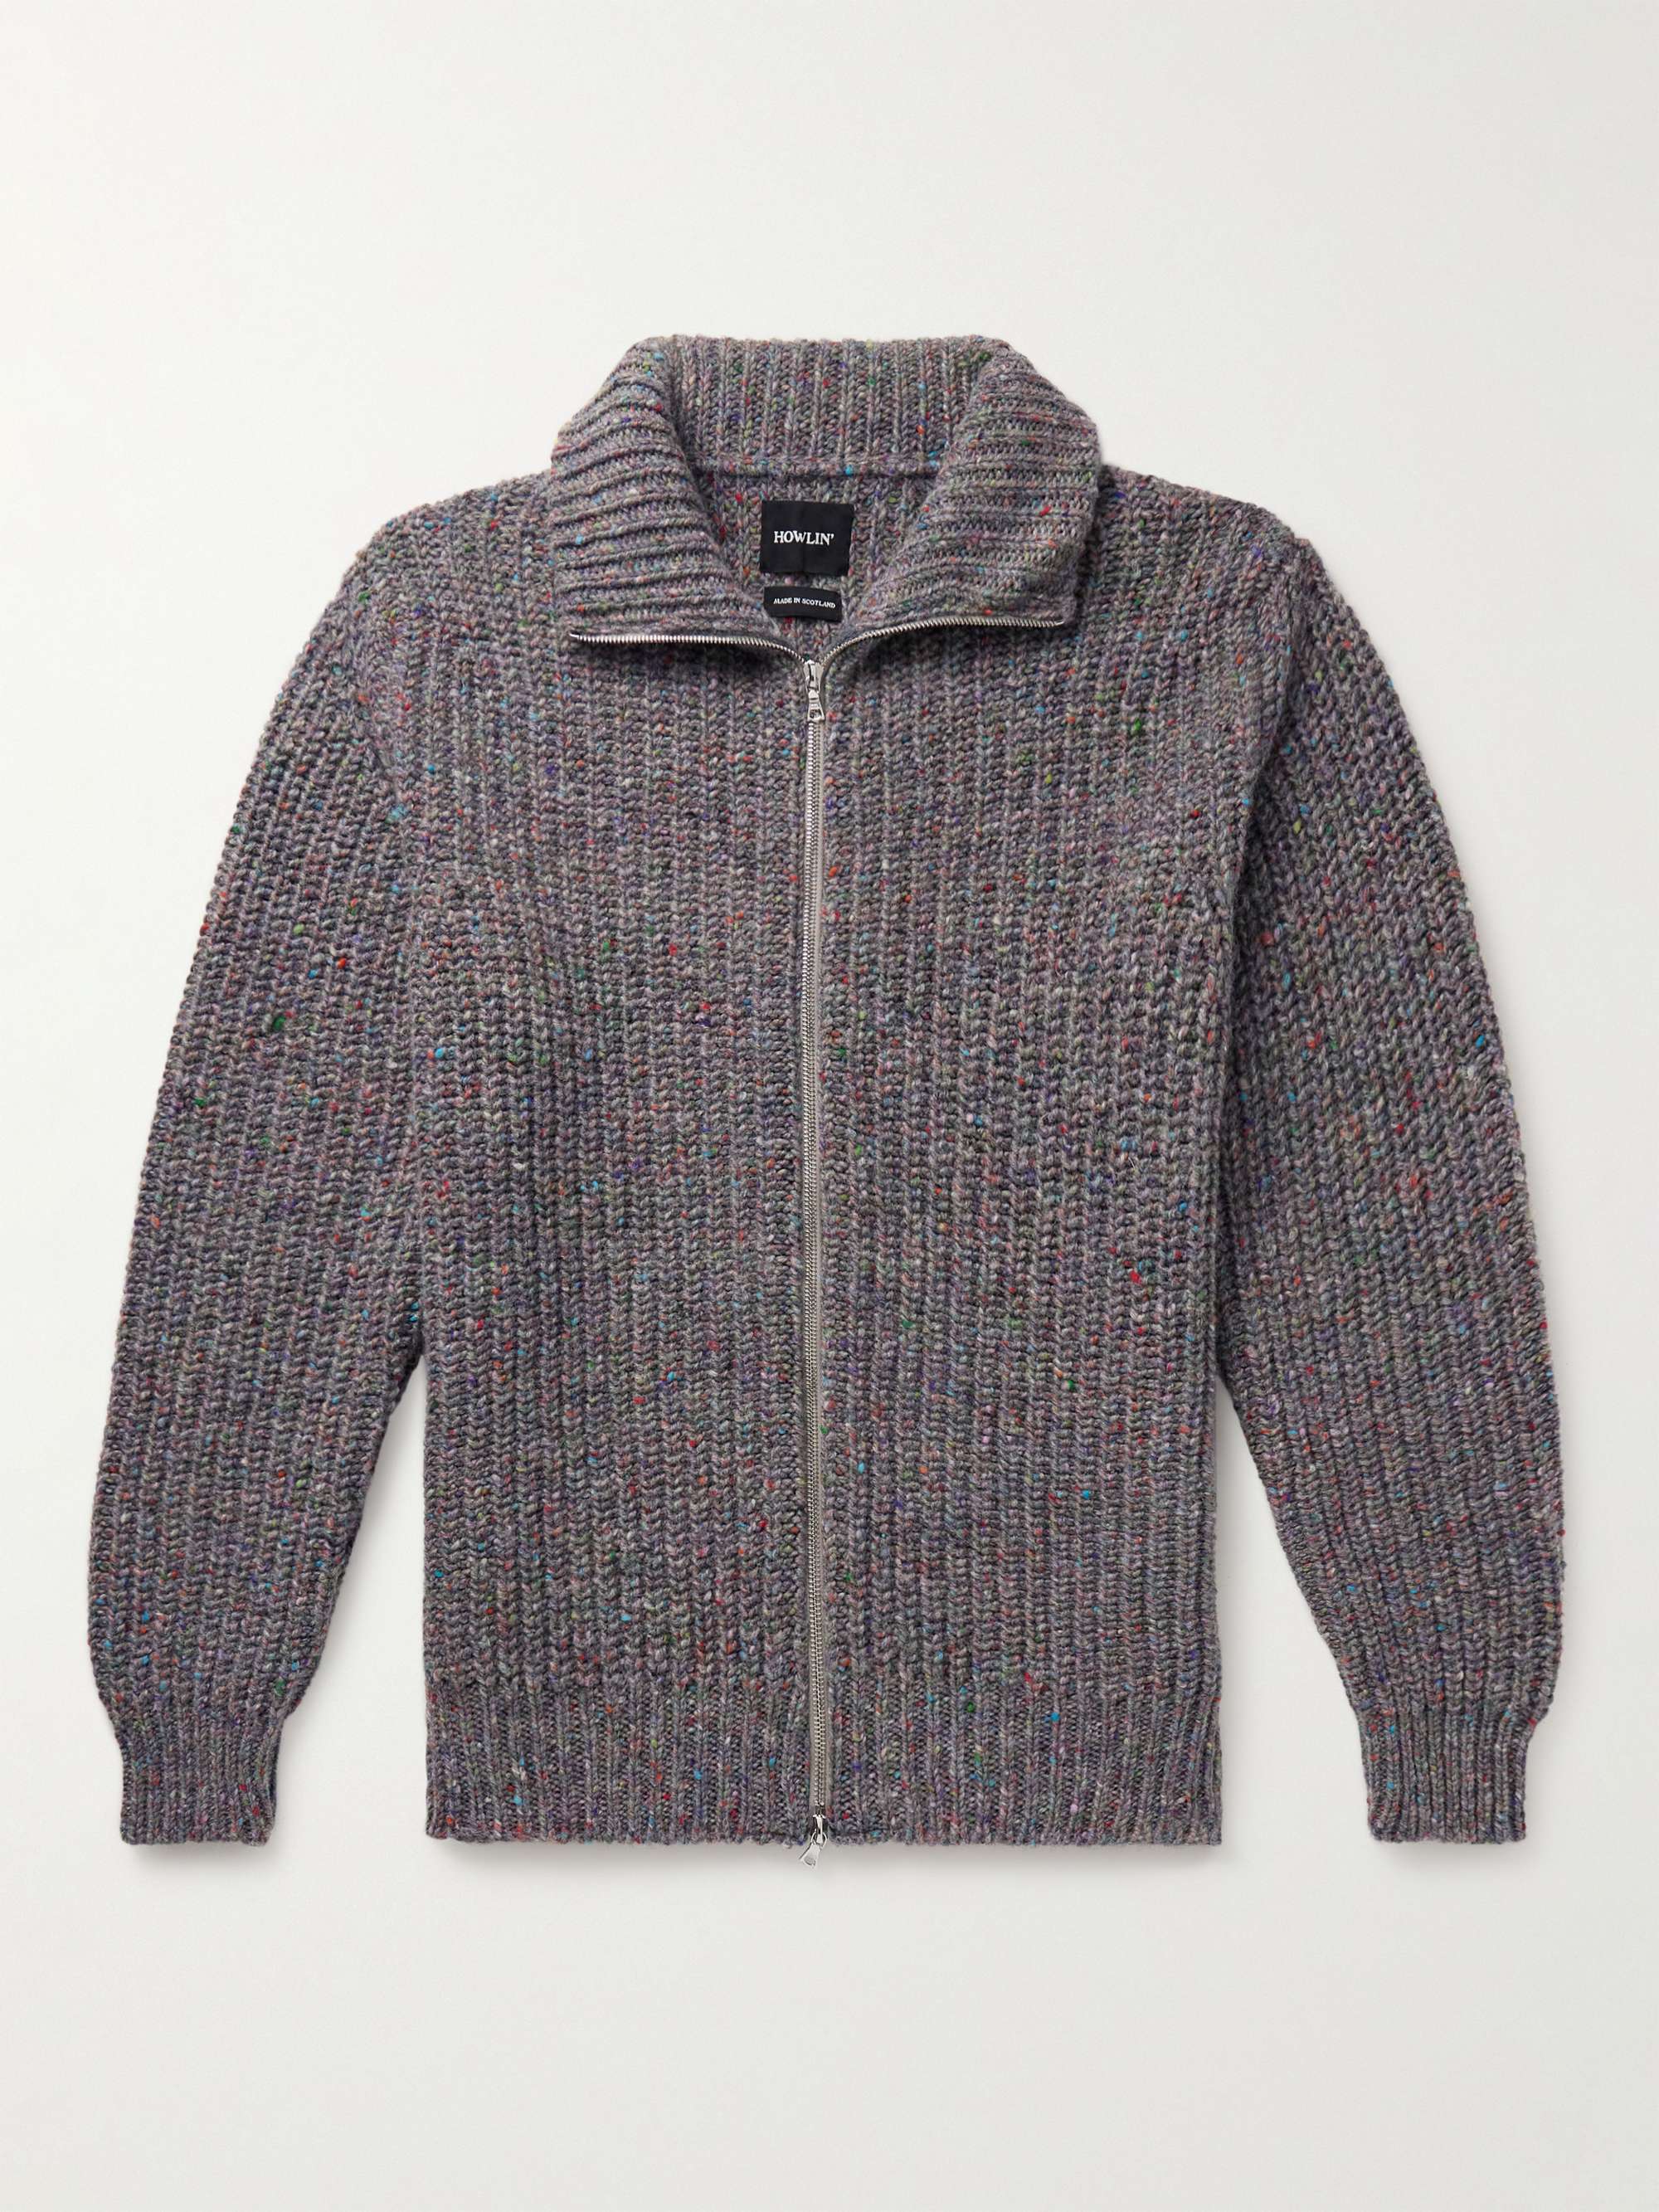 HOWLIN Loose Ends Ribbed Donegal Wool Zip-Up Cardigan,Gray